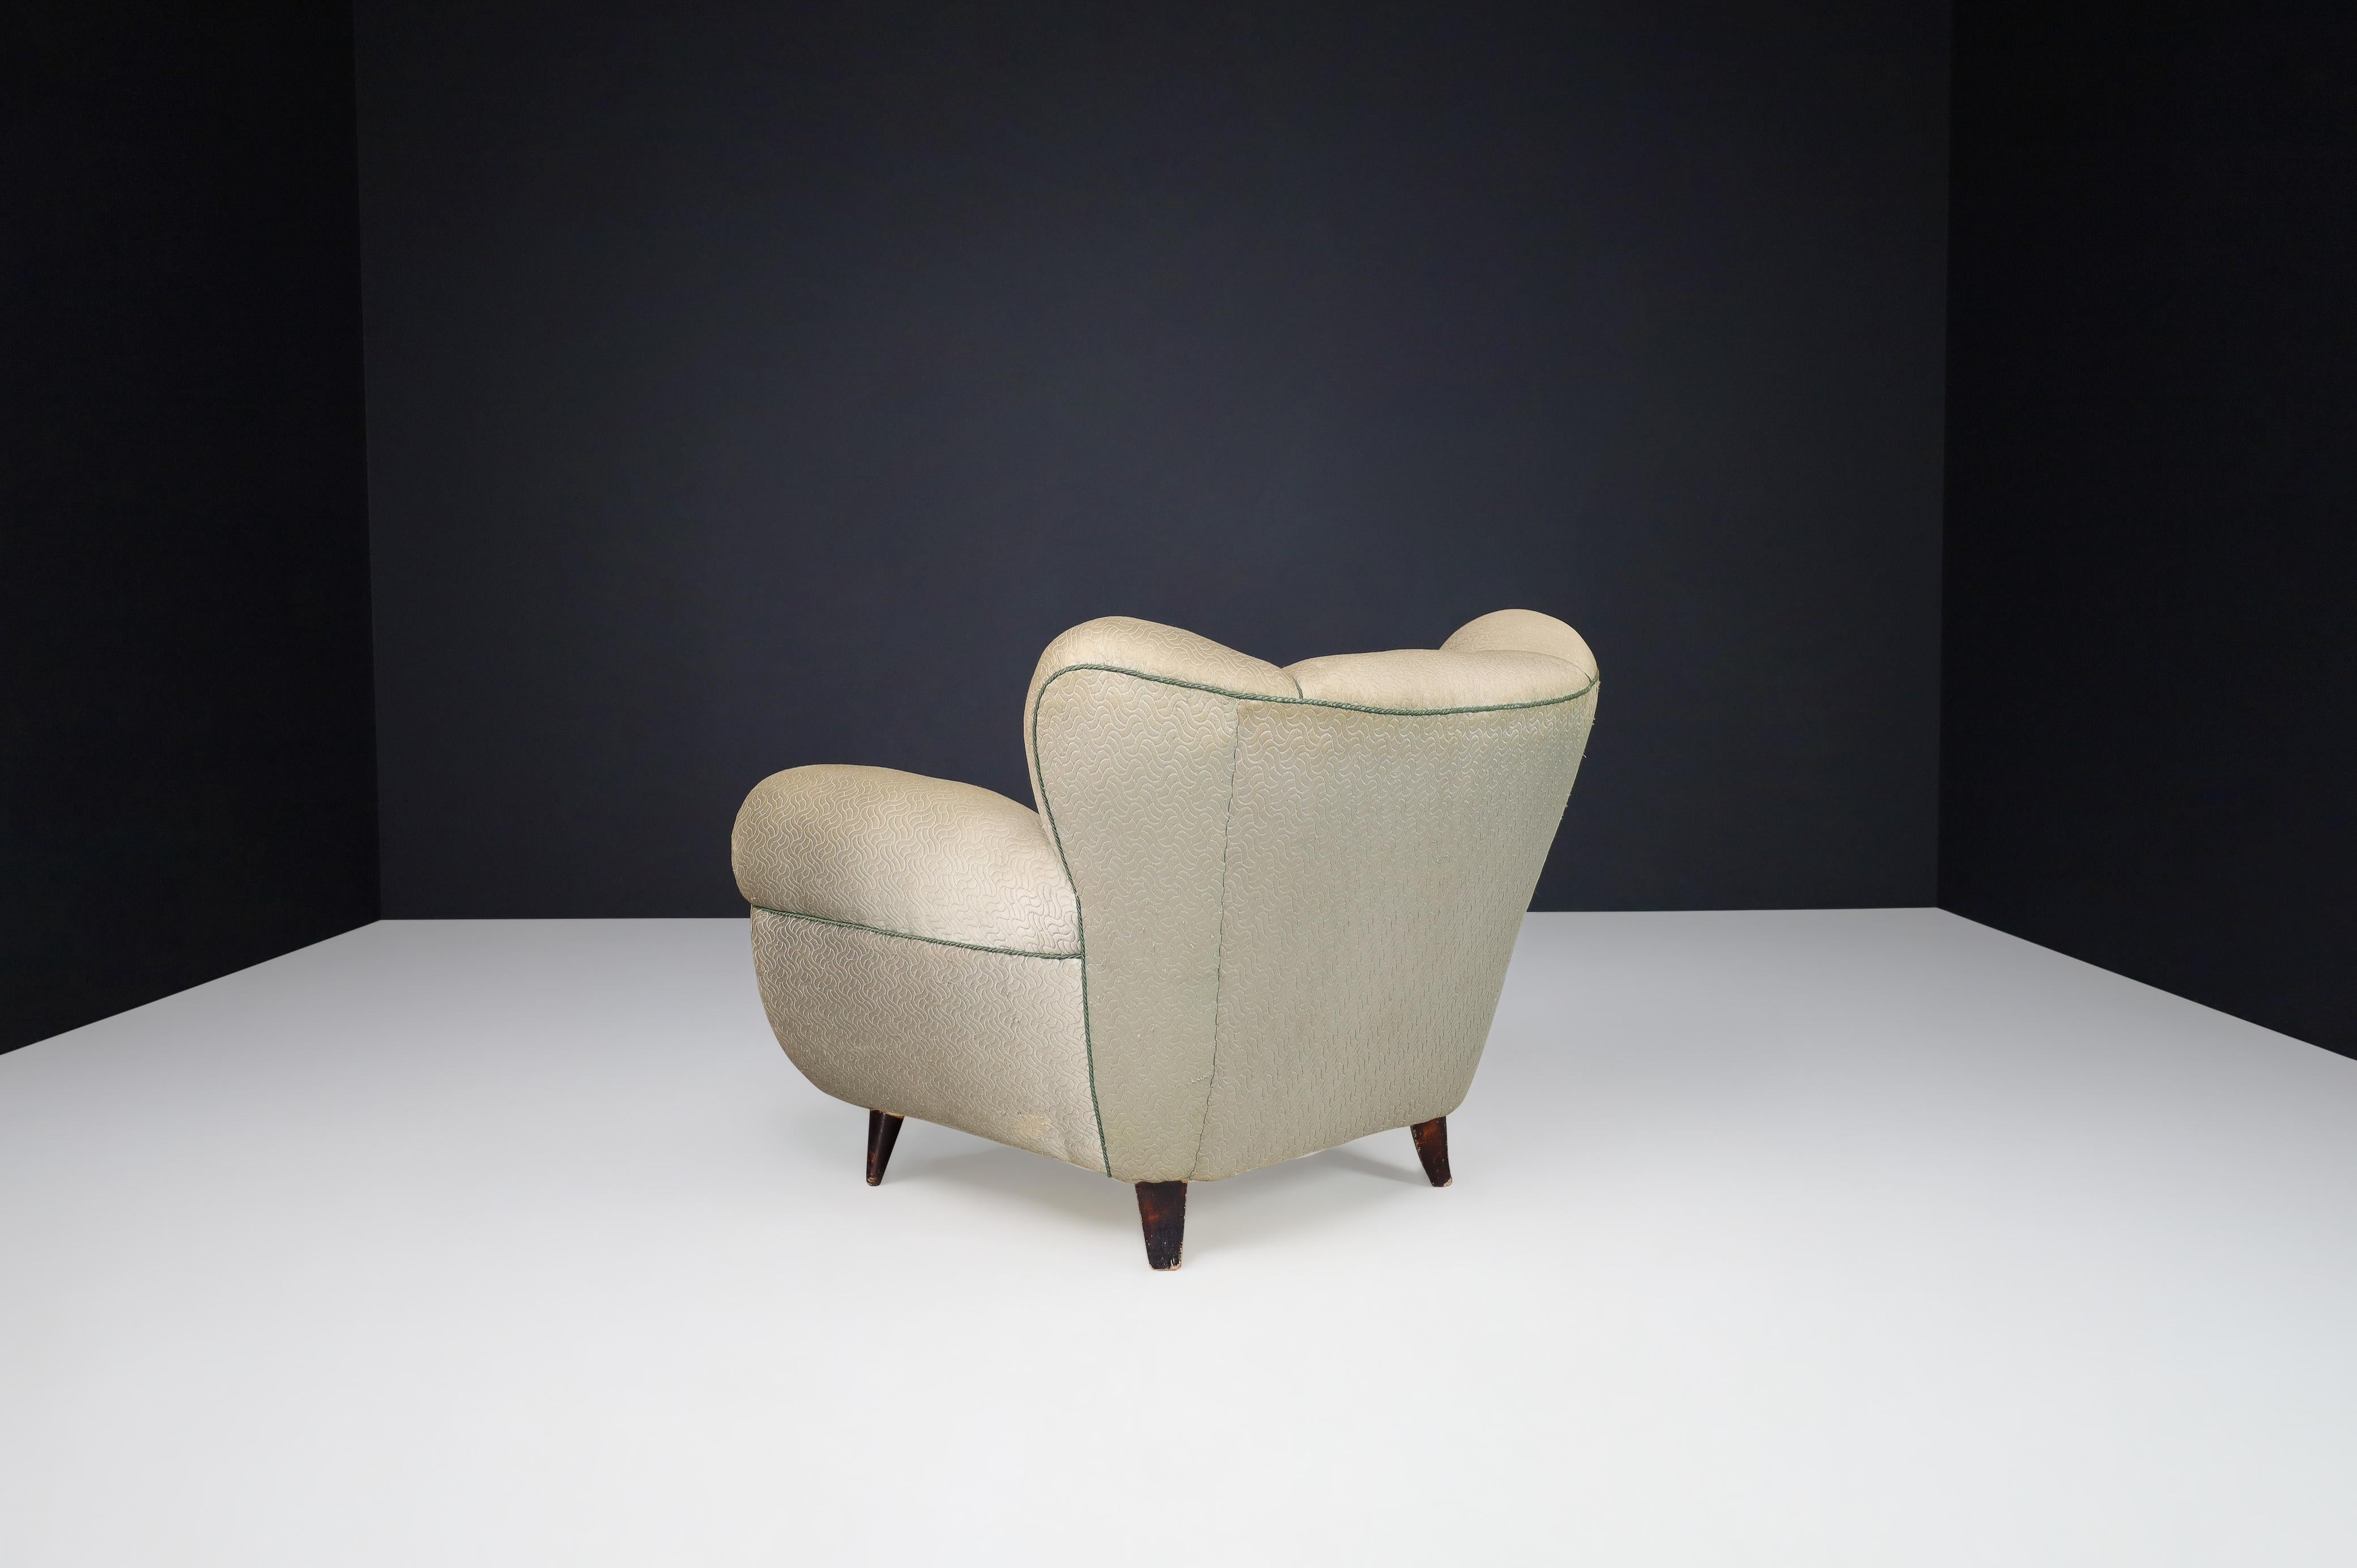 20th Century Uglielmo Ulrich Art Deco Lounge Chairs in Original Fabric, Italy 1930s For Sale